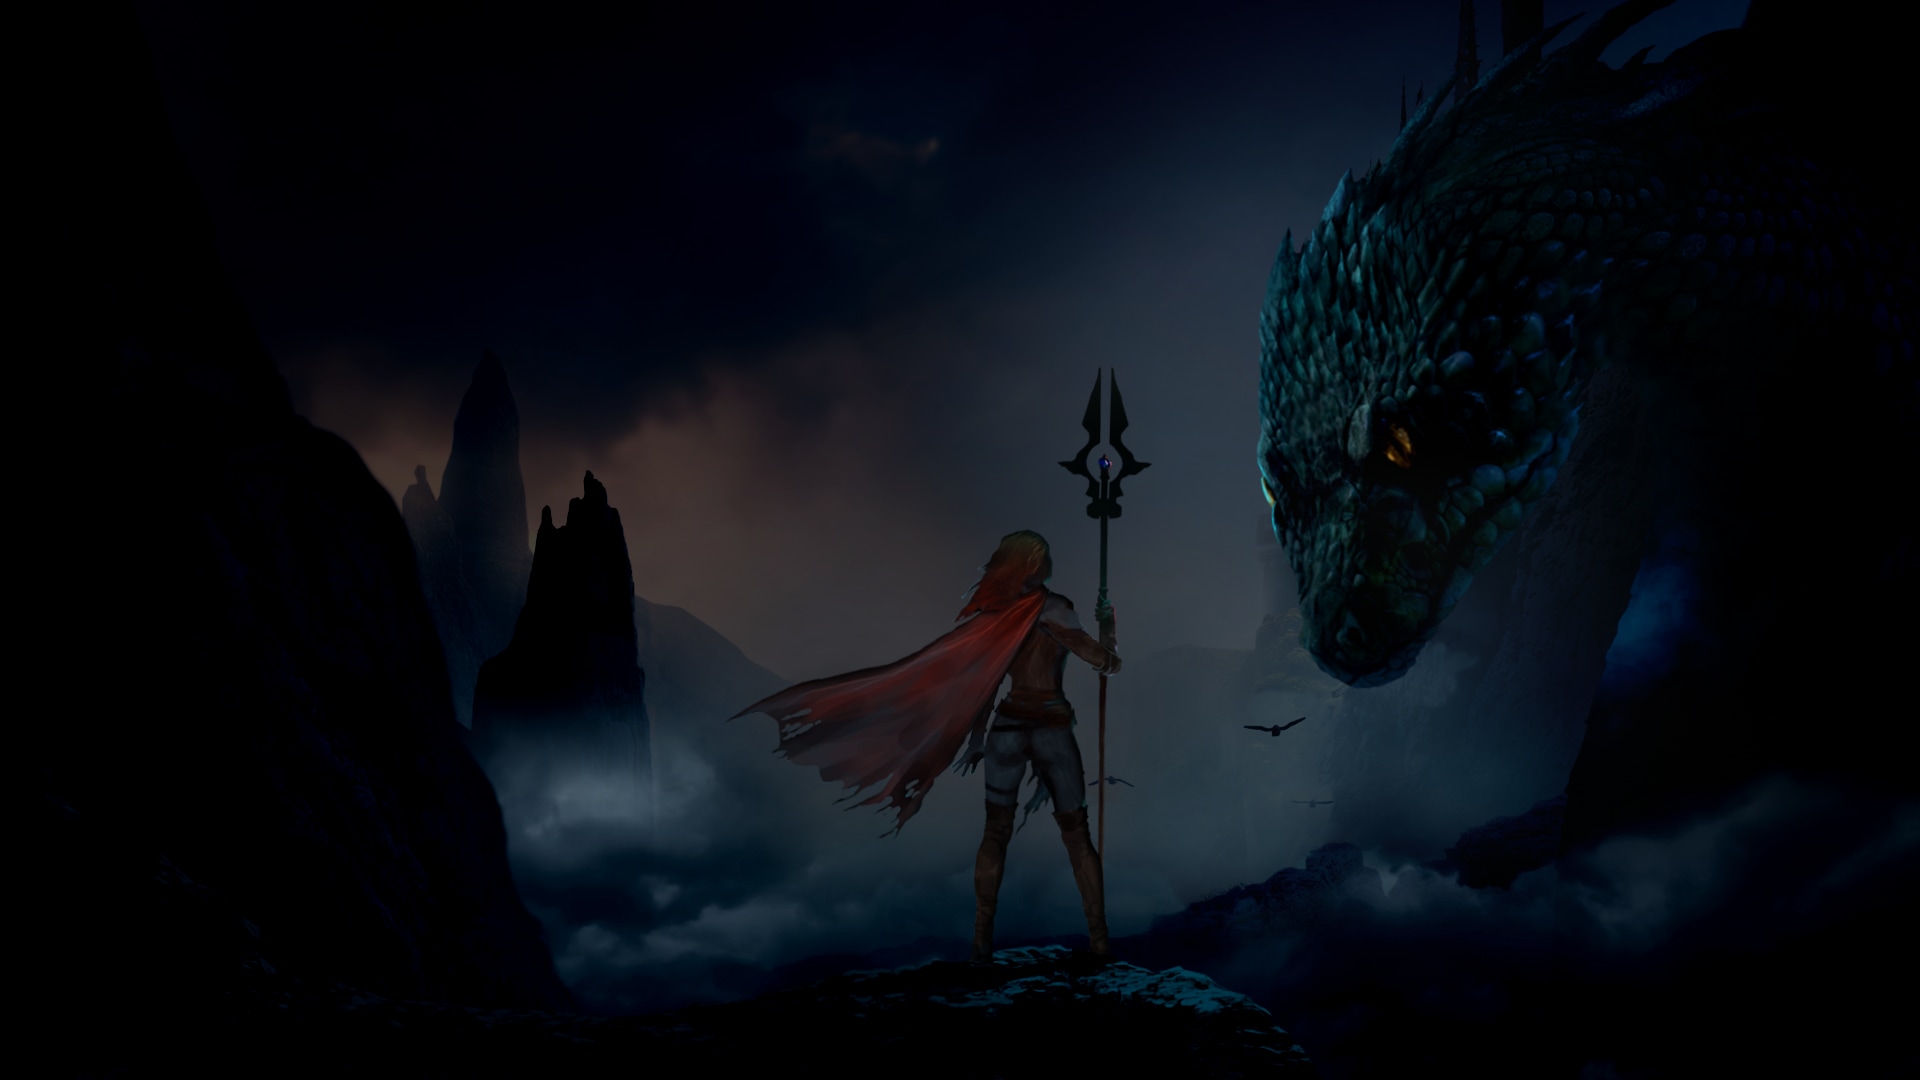 A dragon readies fire in its mouth atop a mountain. In front stands a figure with a shield. As the dragon breathes fire, the shield expands.